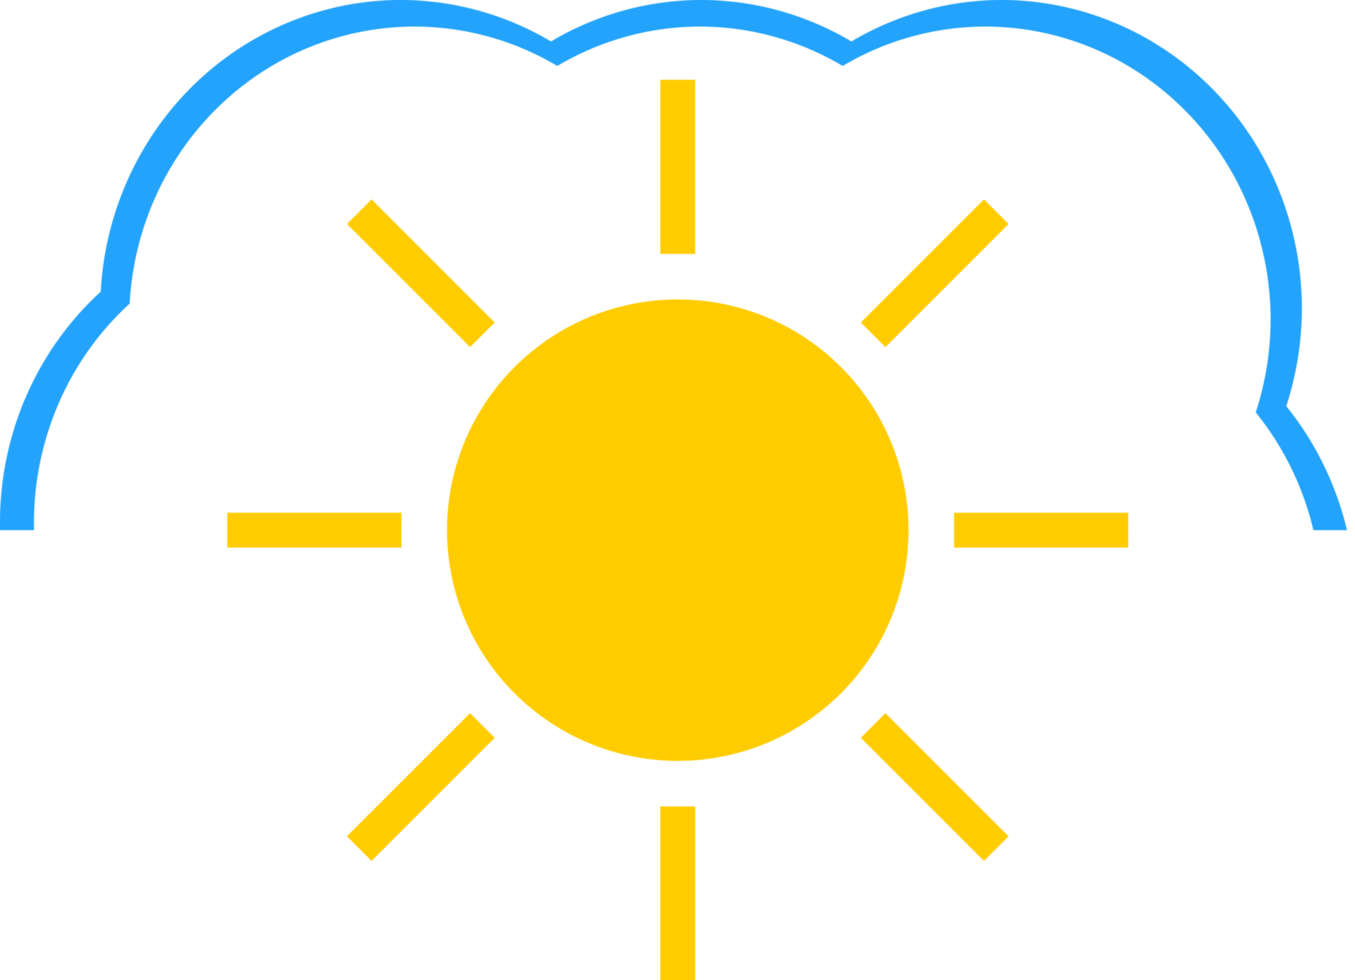 icon cloud with sun png